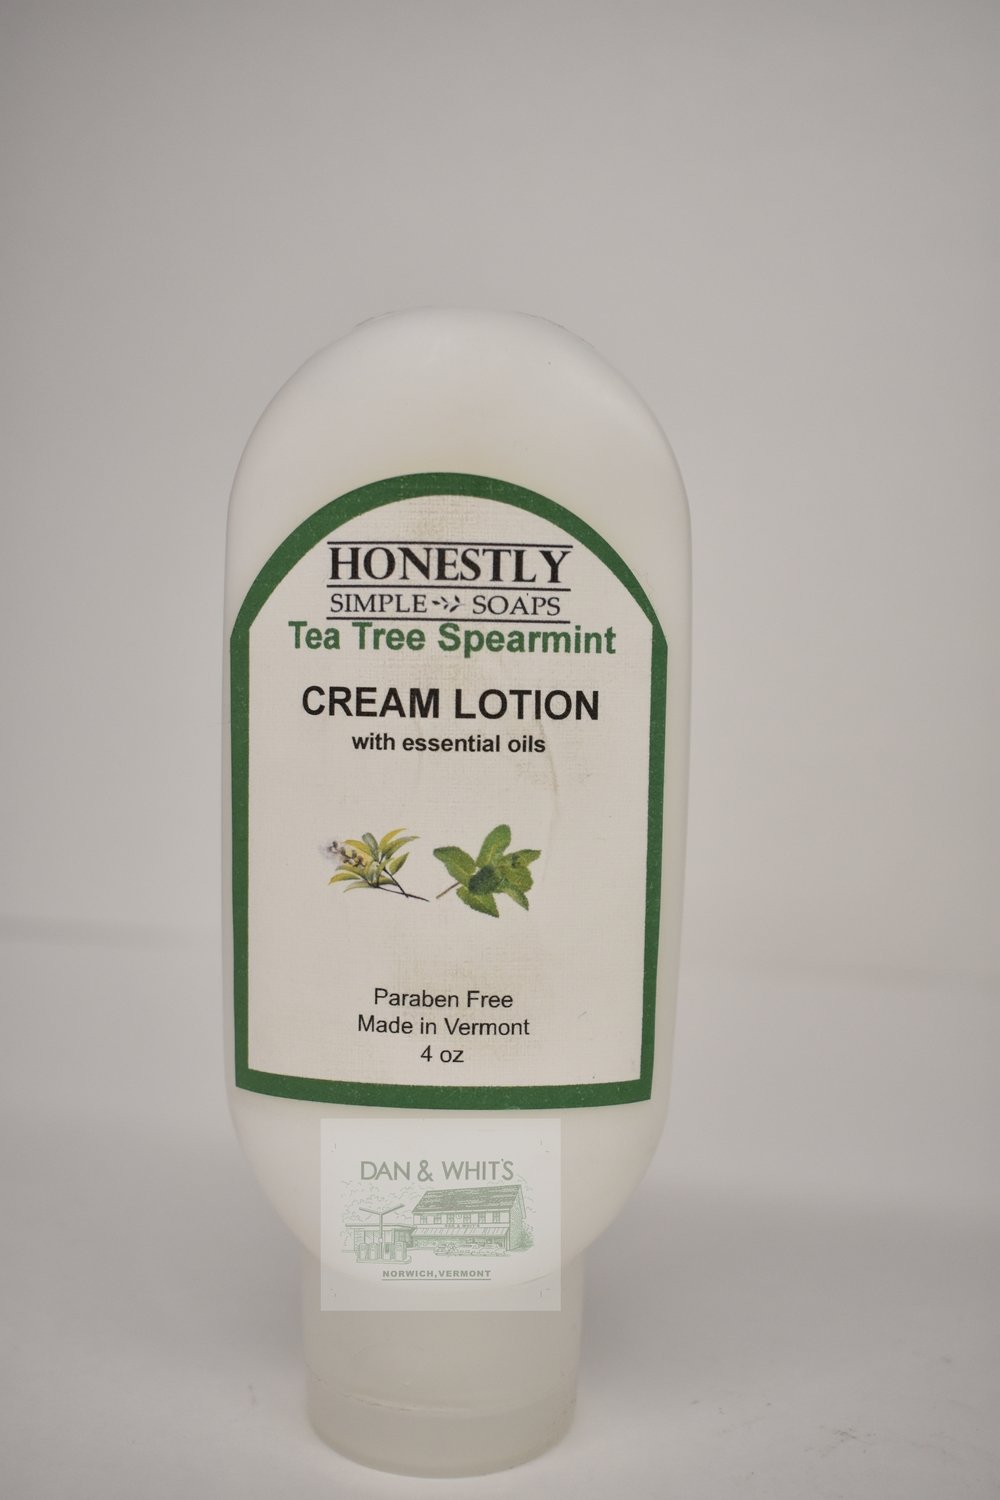 Honestly Tea Tree Spearmint Cream Lotion with essential oil